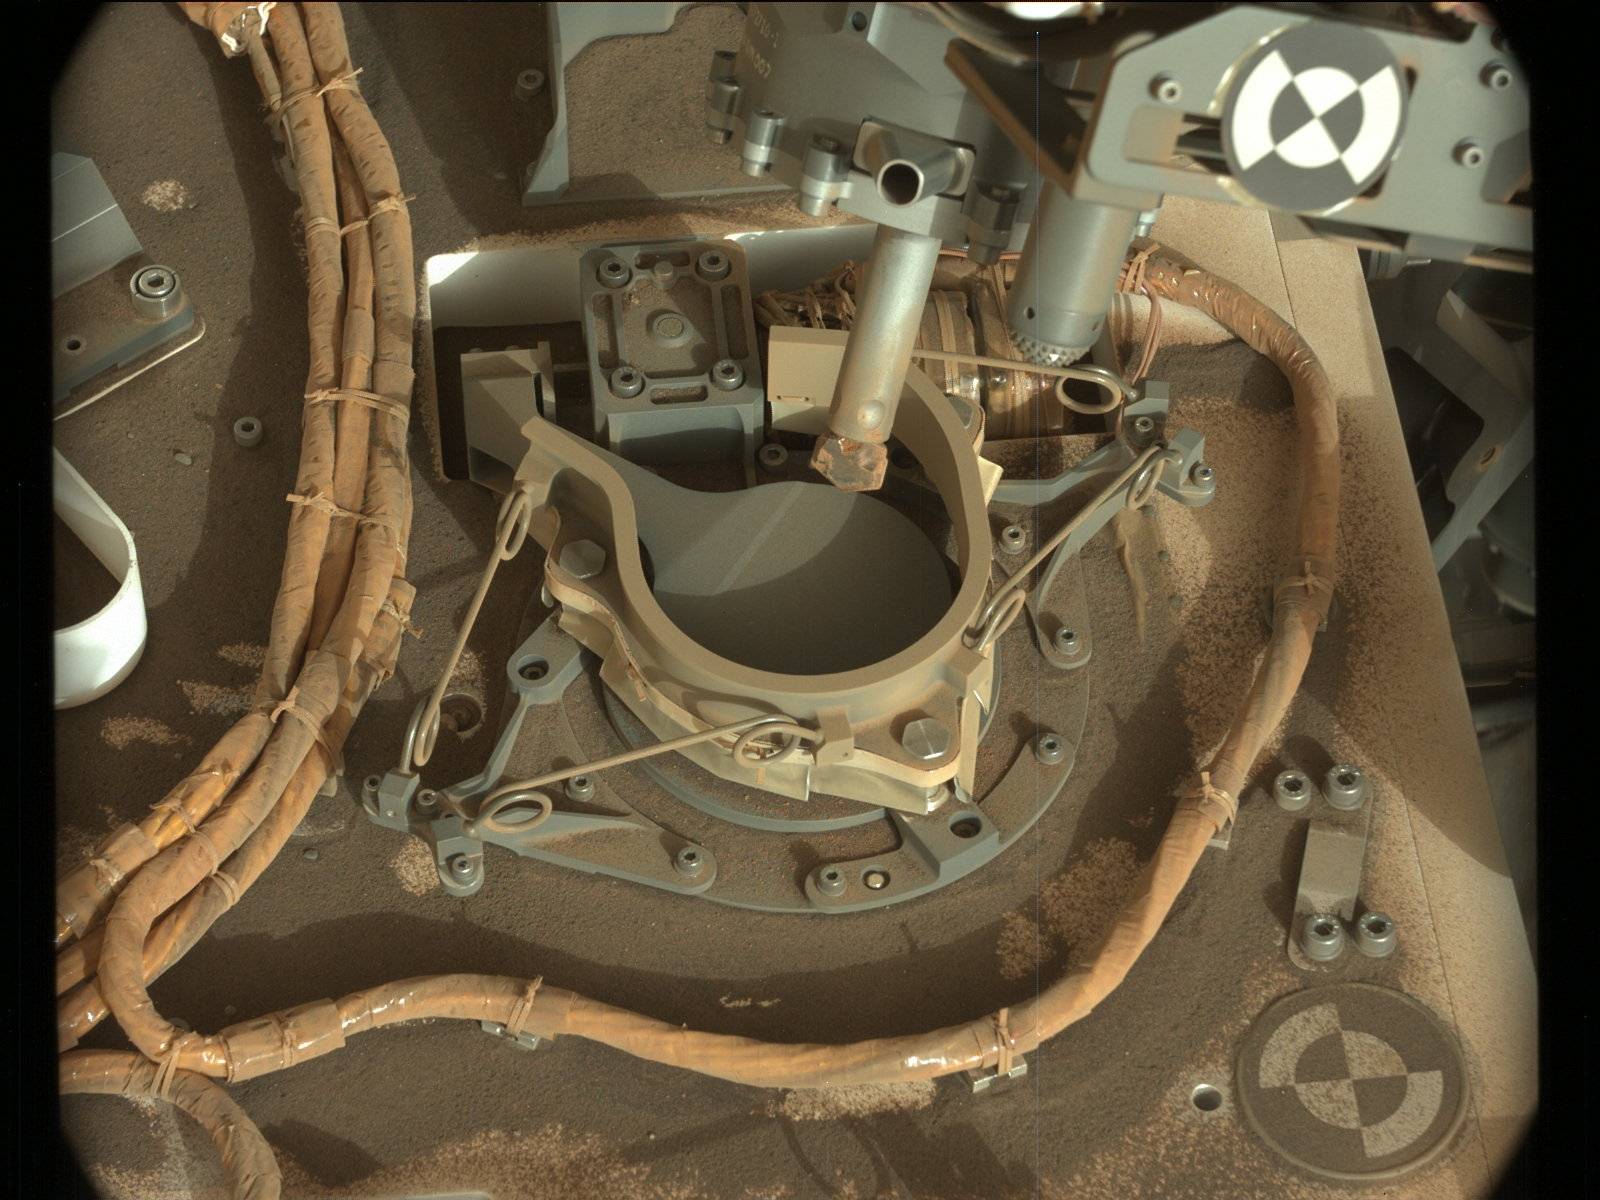 The drill bit of NASA's Curiosity Mars rover over one of the sample inlets on the rover's deck. The inlets lead to Curiosity's onboard laboratories. This image was taken on Sol 2068 by the rover's Mast Camera (Mastcam).